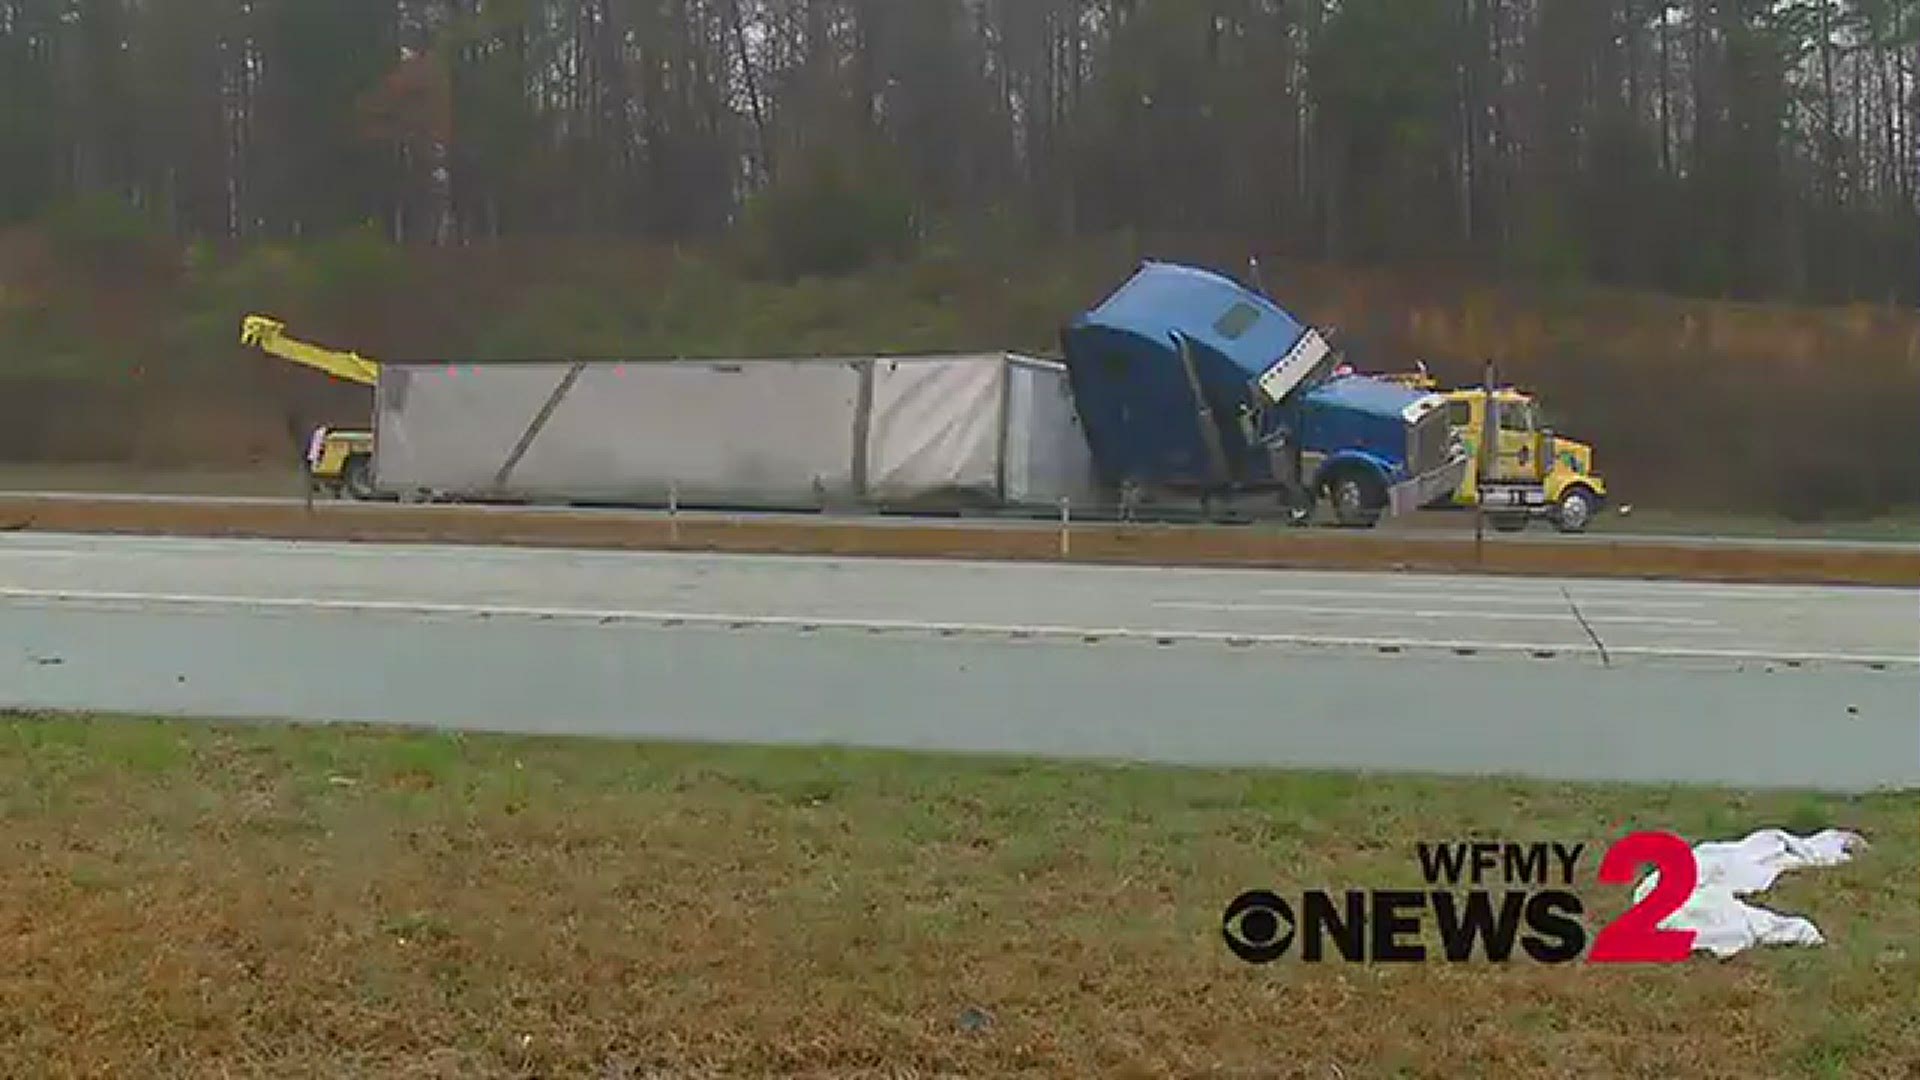 All southbound lanes of I-85 at exit 126 near Greensboro are closed due to an overturned tractor-trailer. No one was hurt.